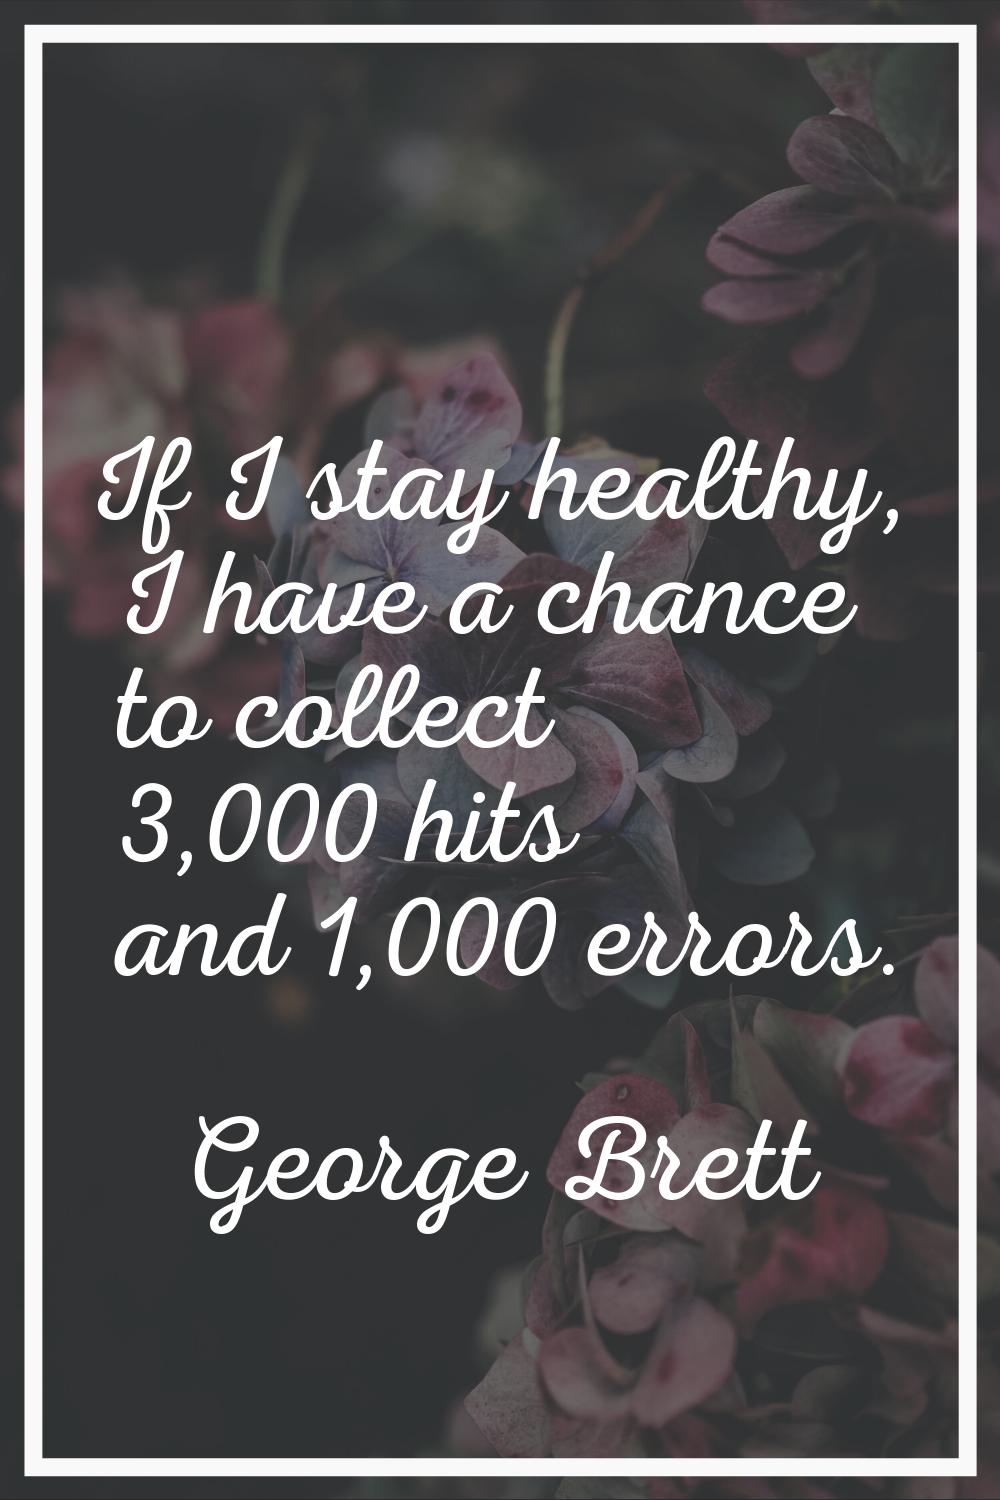 If I stay healthy, I have a chance to collect 3,000 hits and 1,000 errors.